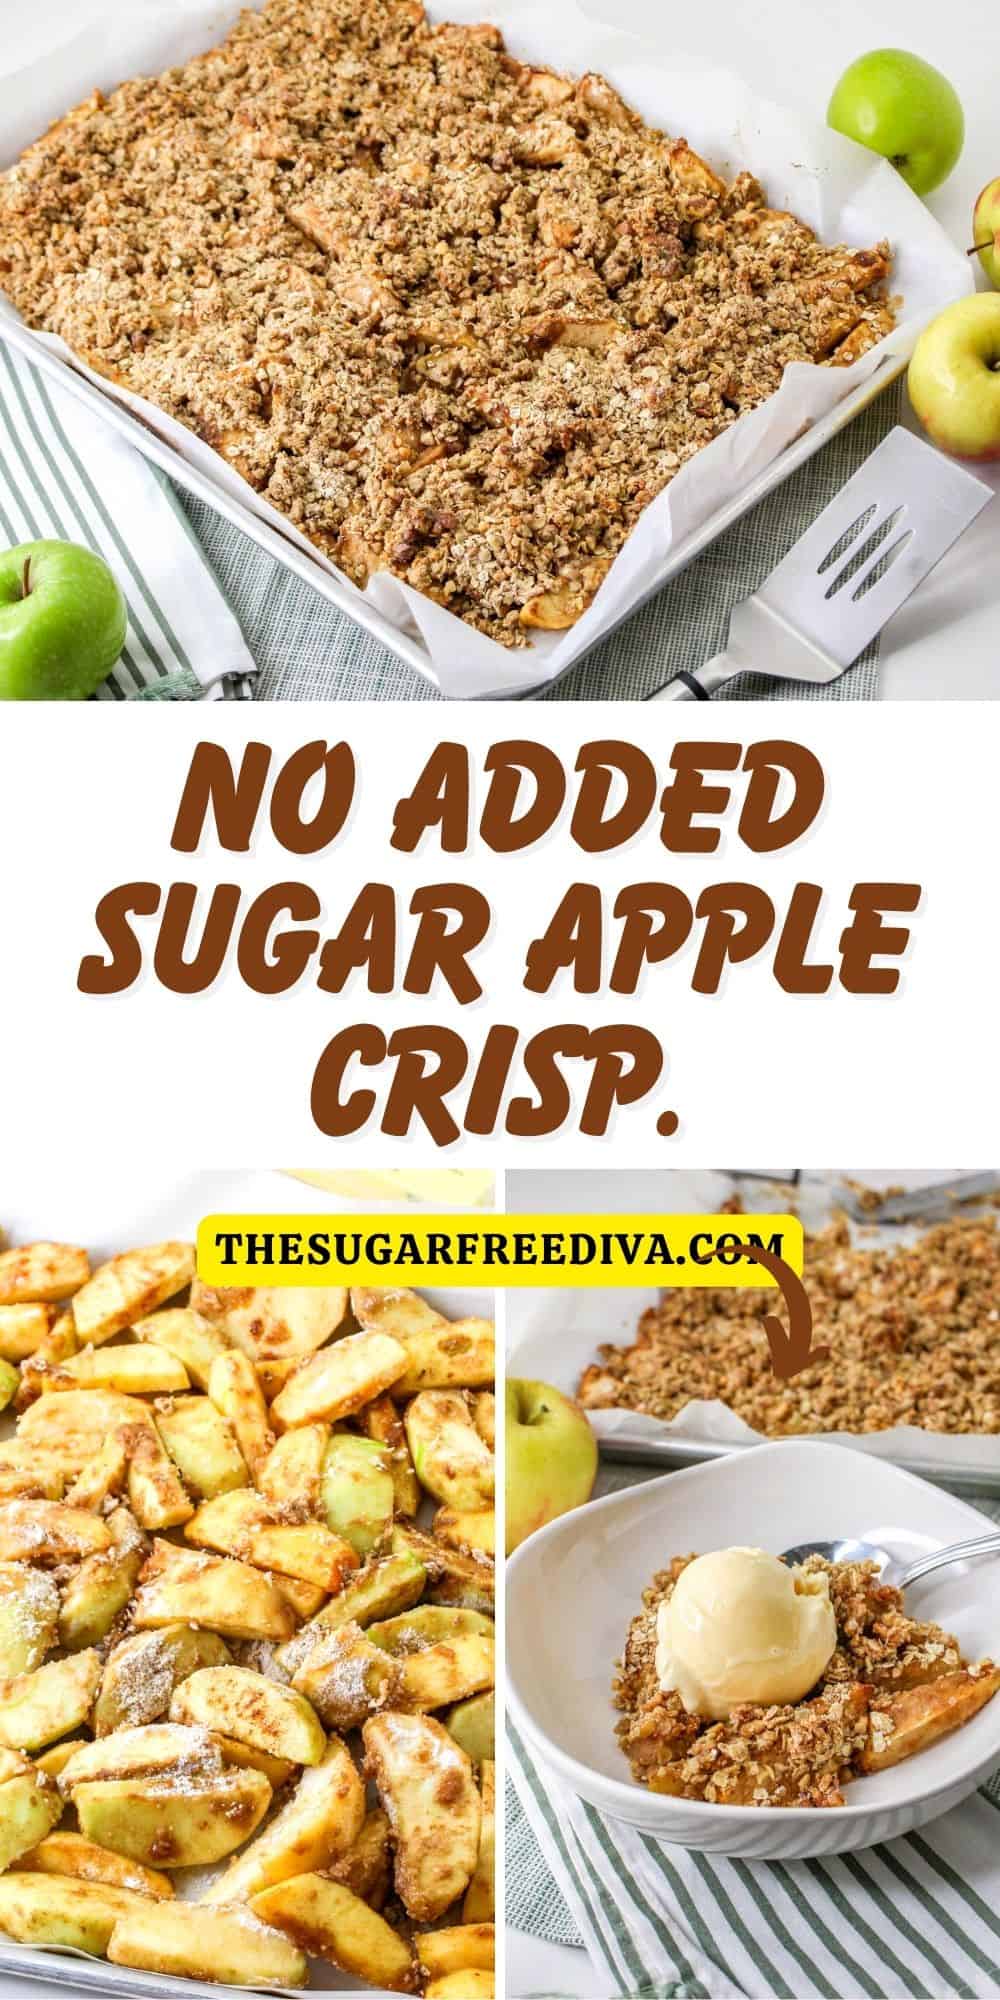 No Added Sugar Apple Crisp. An easy and healthier delicious apple dessert recipe made with fresh apples and oats baked on a sheet pan.